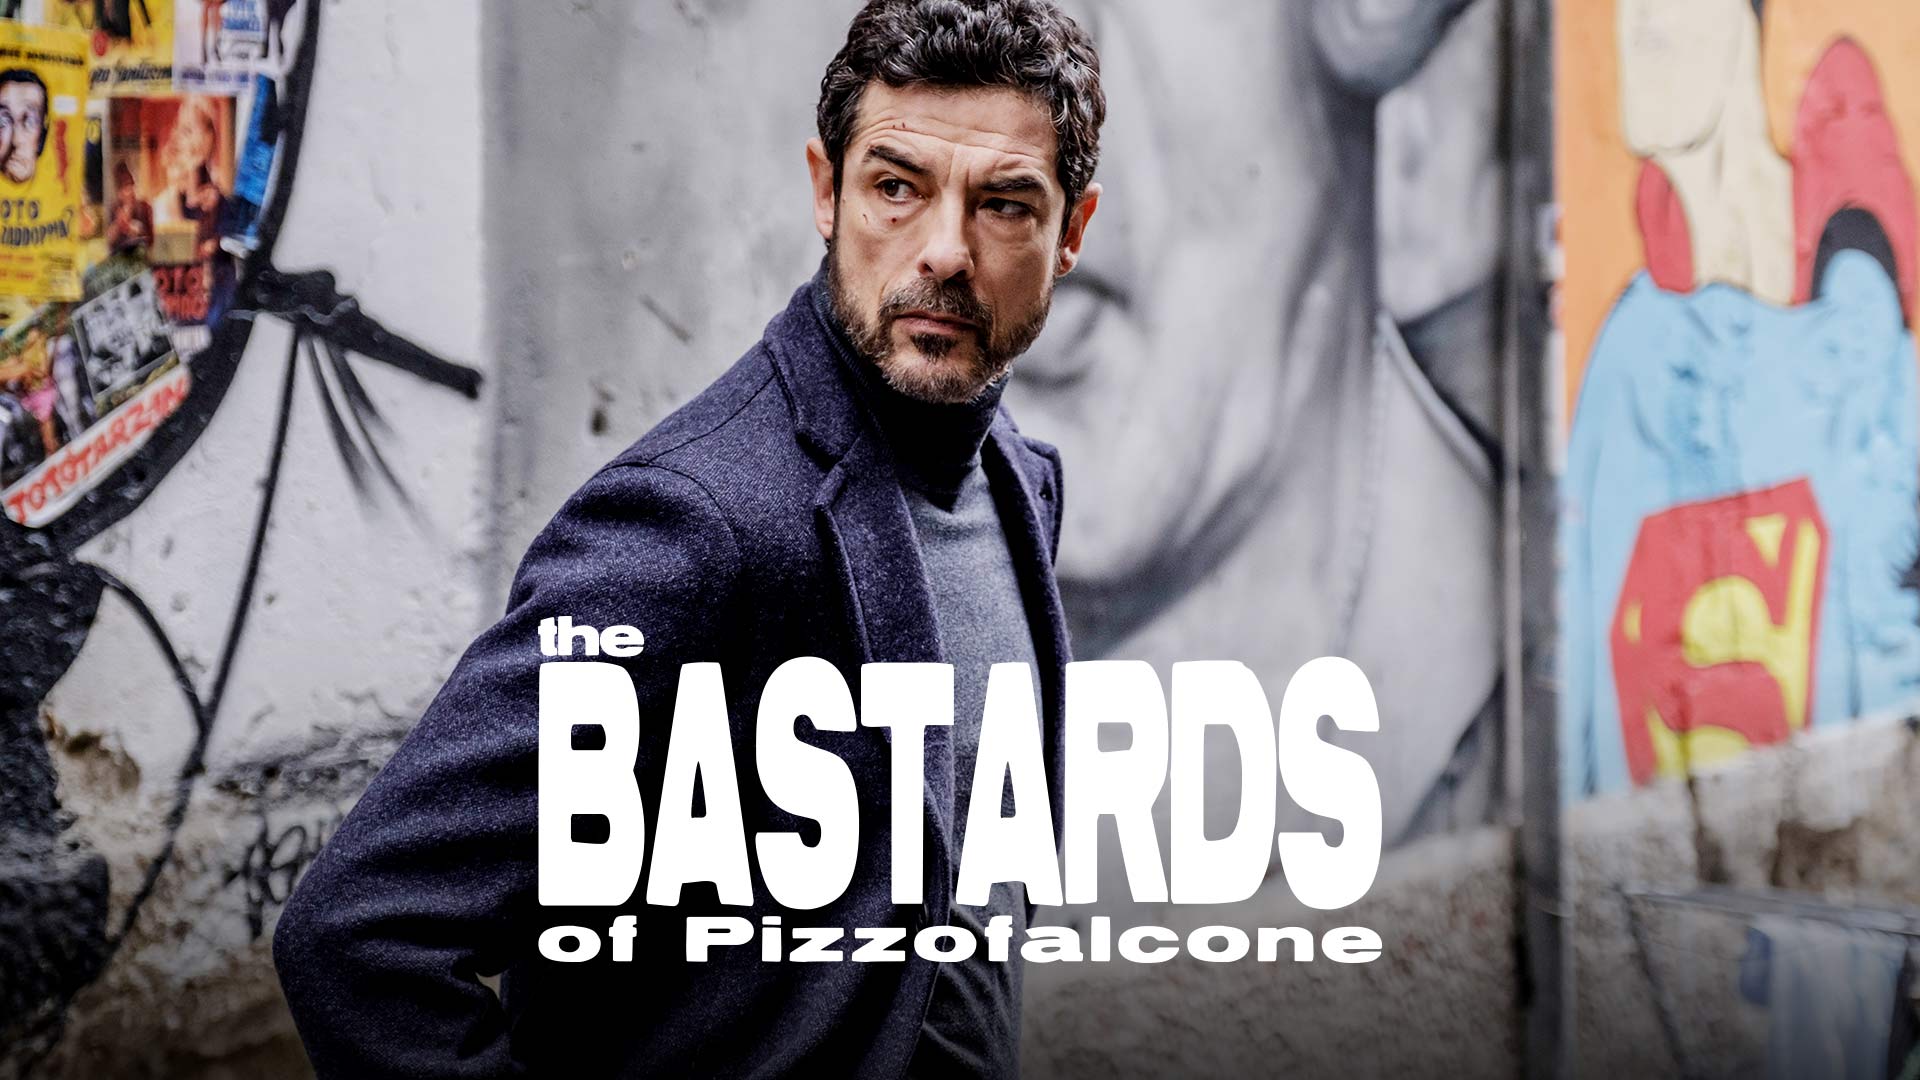 the bastards of pizzofalcome s3 promo 10 1920x1080 1